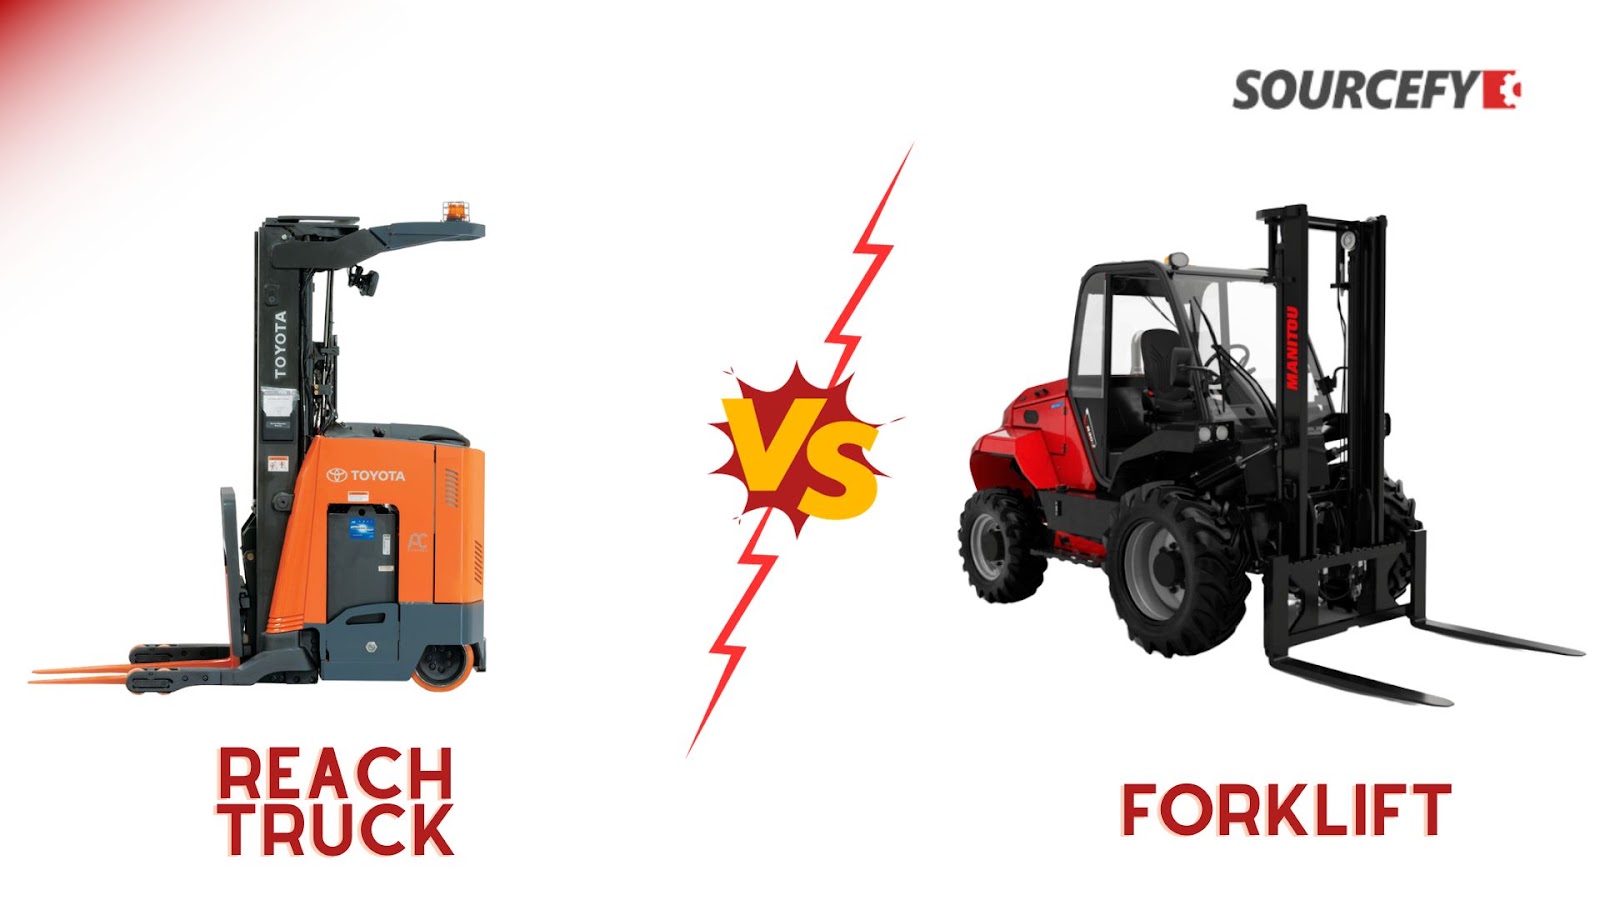 Reach Truck vs Forklift - Which one do You Need?